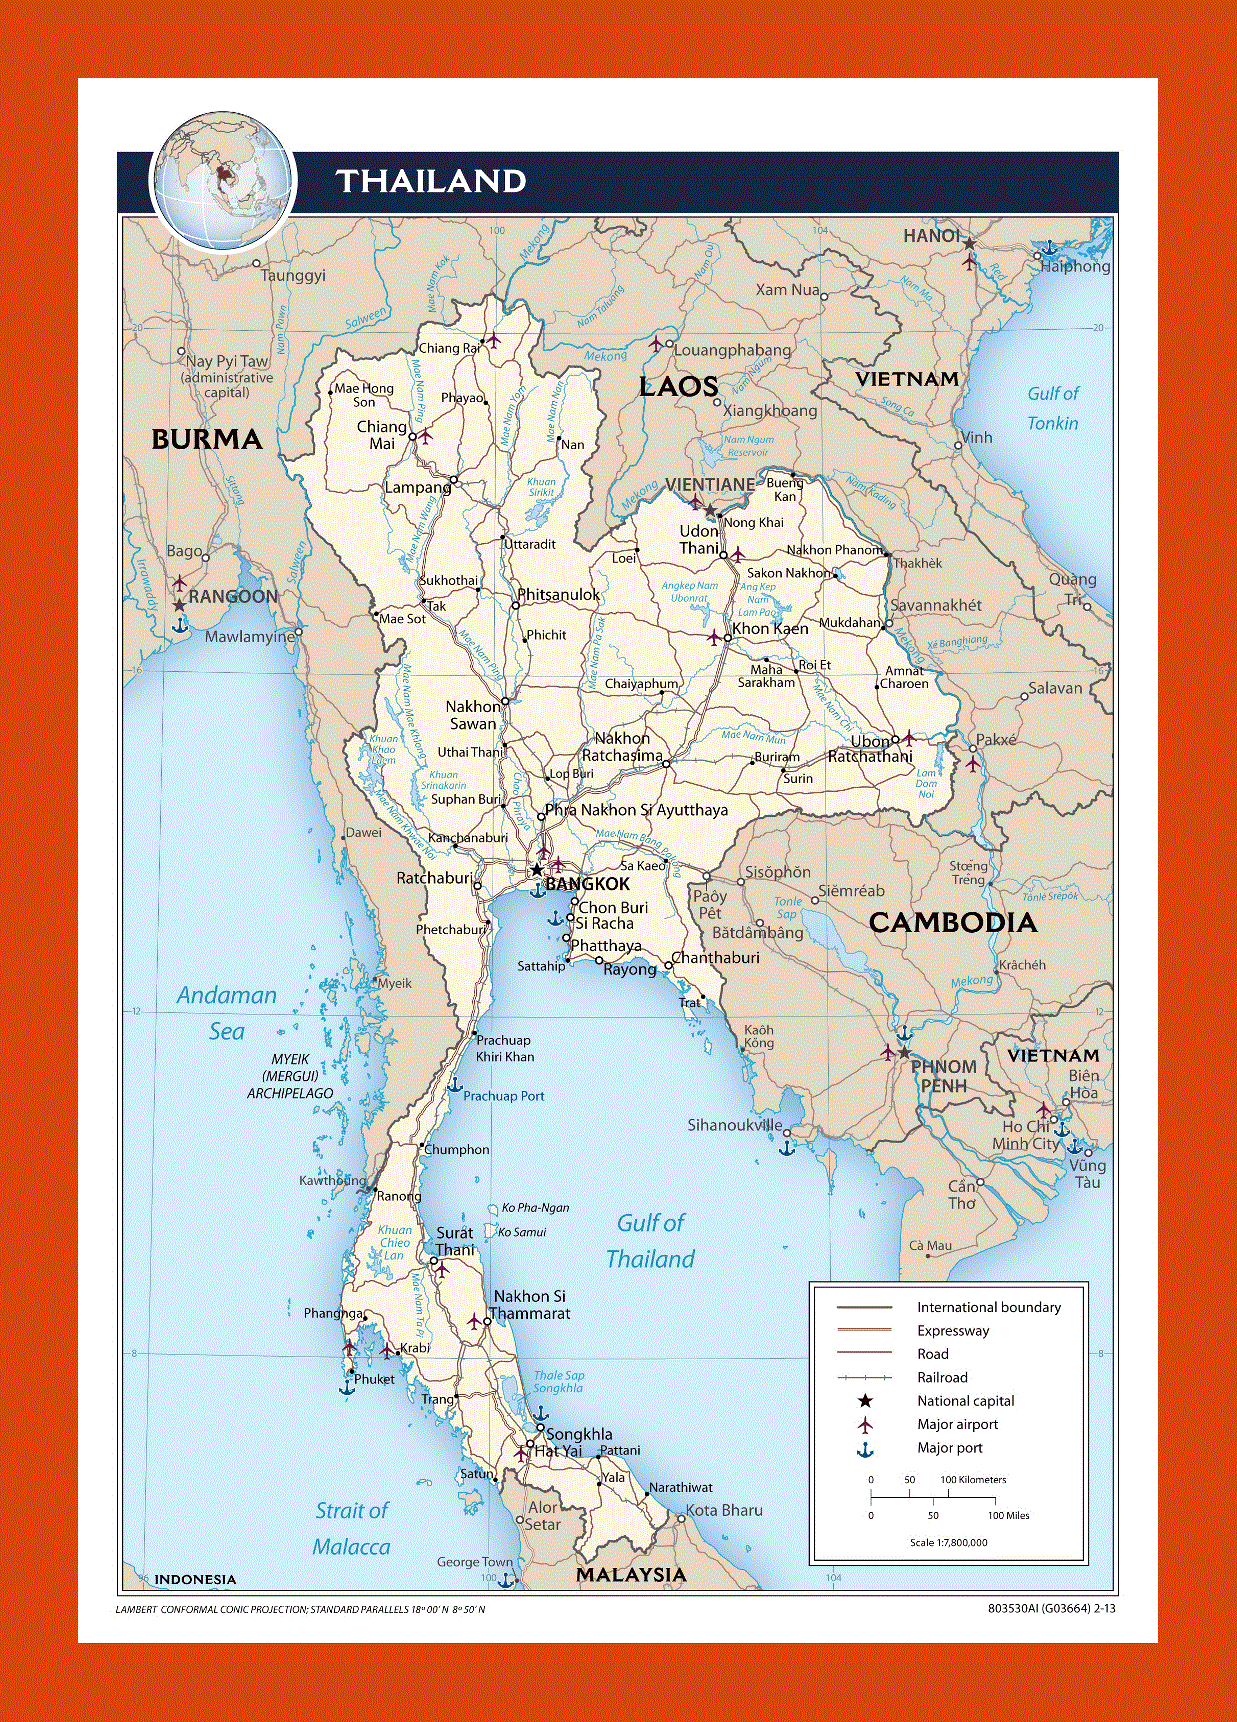 Political map of Thailand - 2013